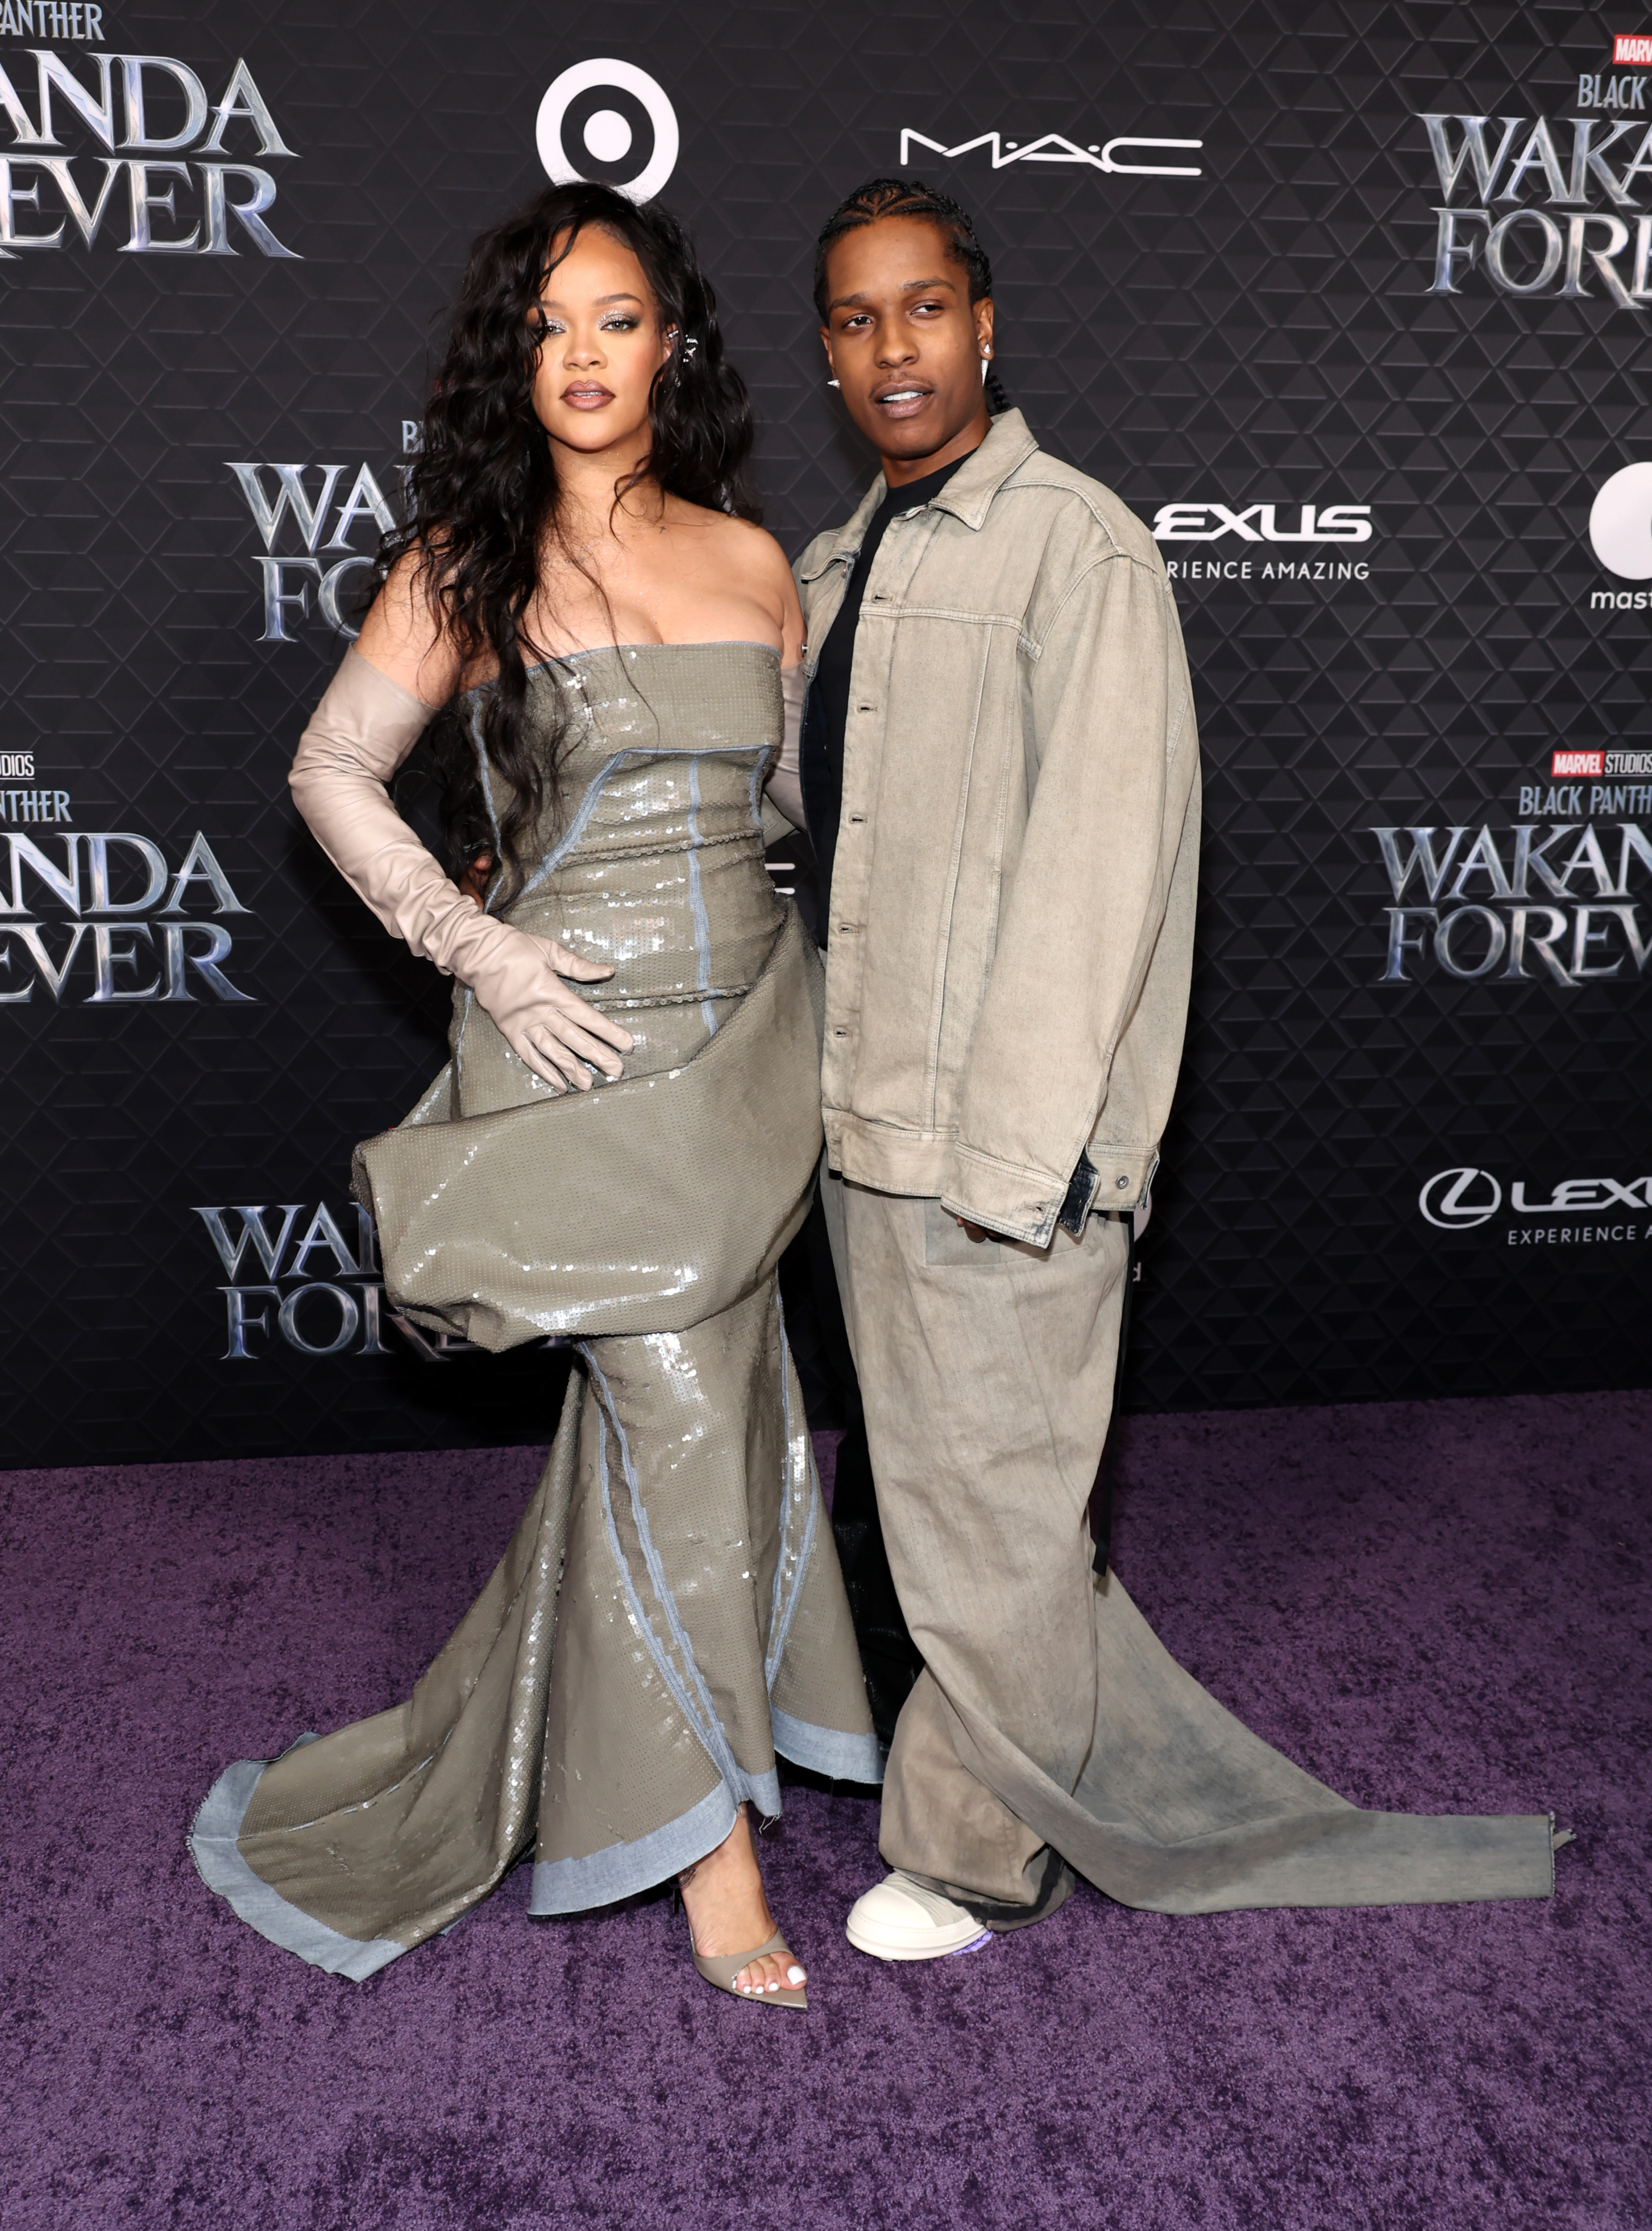 Rihanna and A$AP Rocky attend Marvel Studios' "Black Panther: Wakanda Forever" premiere at Dolby Theatre on October 26, 2022, in Hollywood, California. | Source: Getty Images